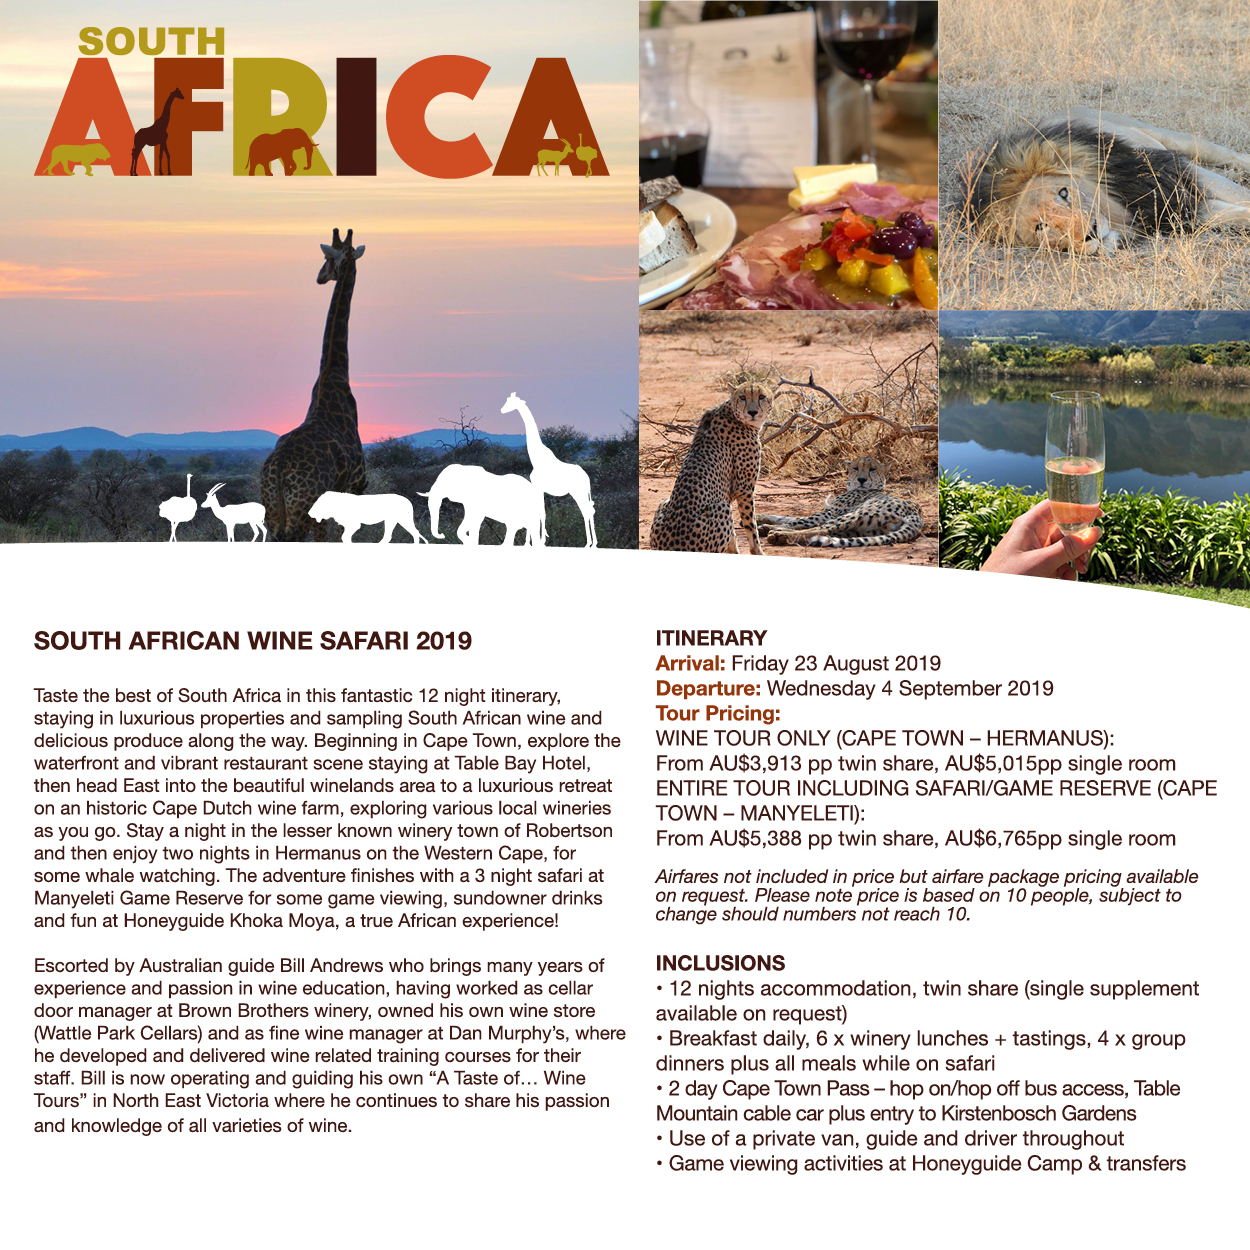 South Africa Travel and Cruise